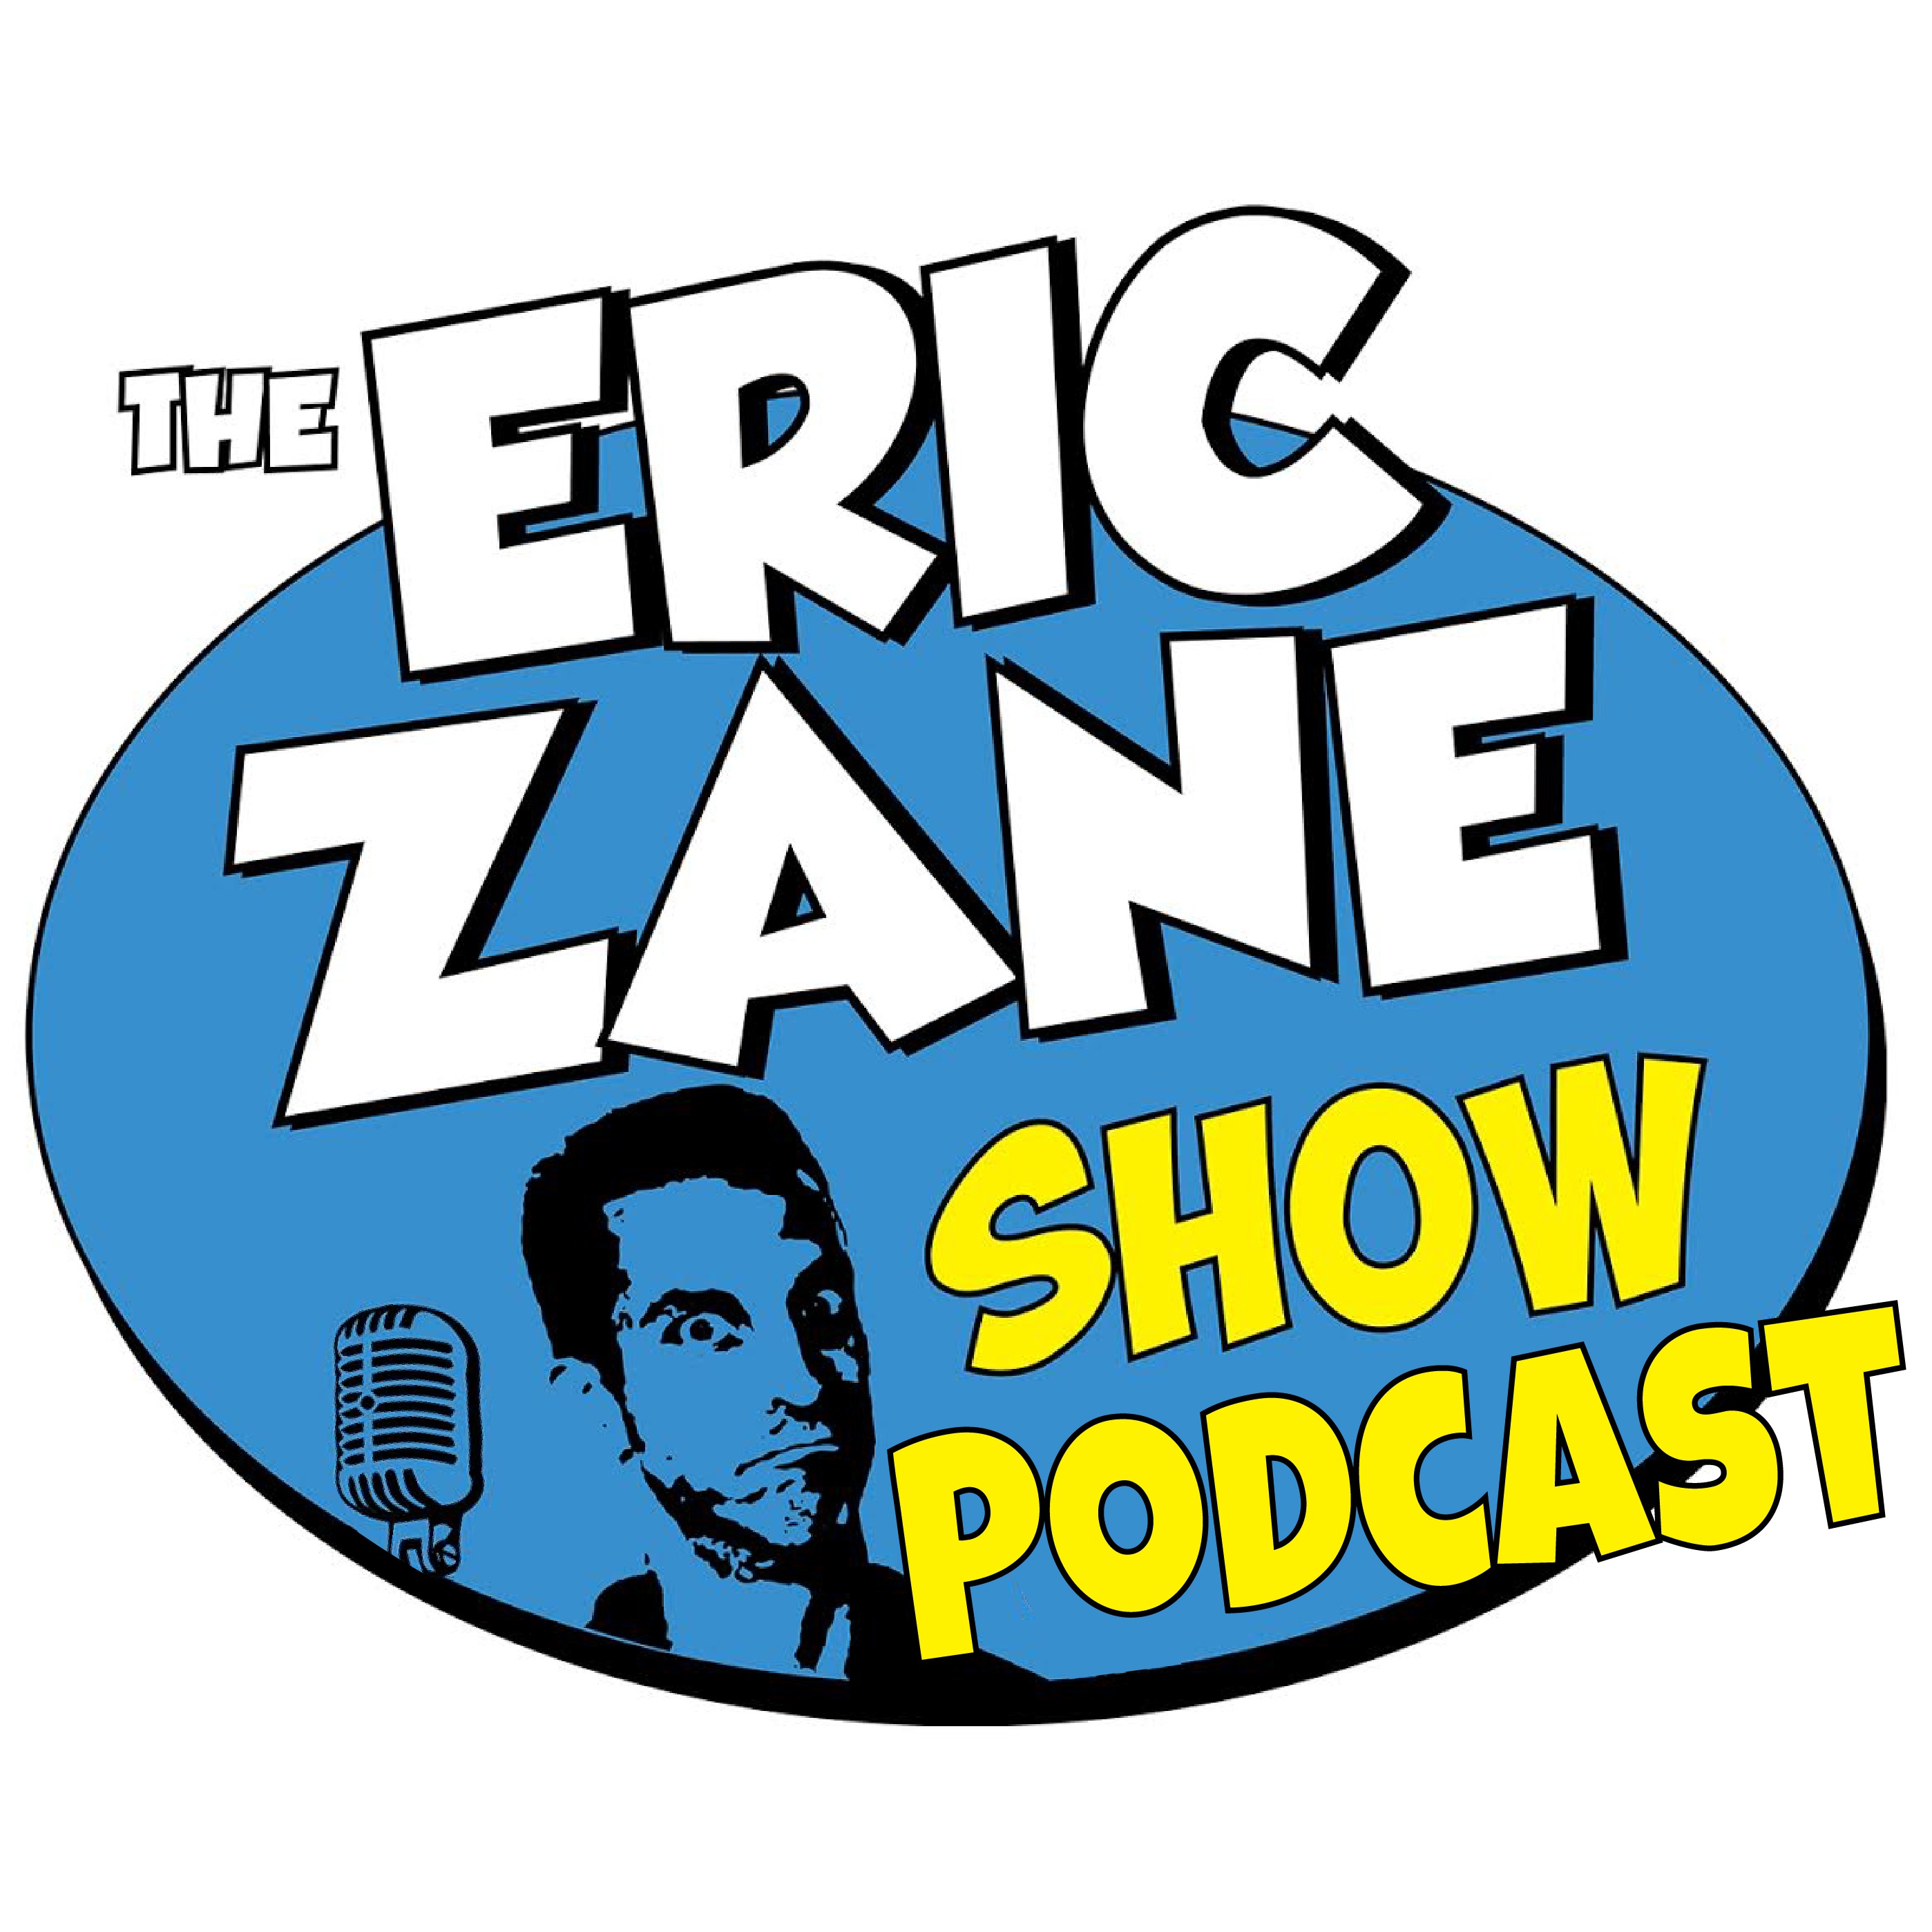 Eric Zane Show Podcast  999 - FlowMax to the rescue